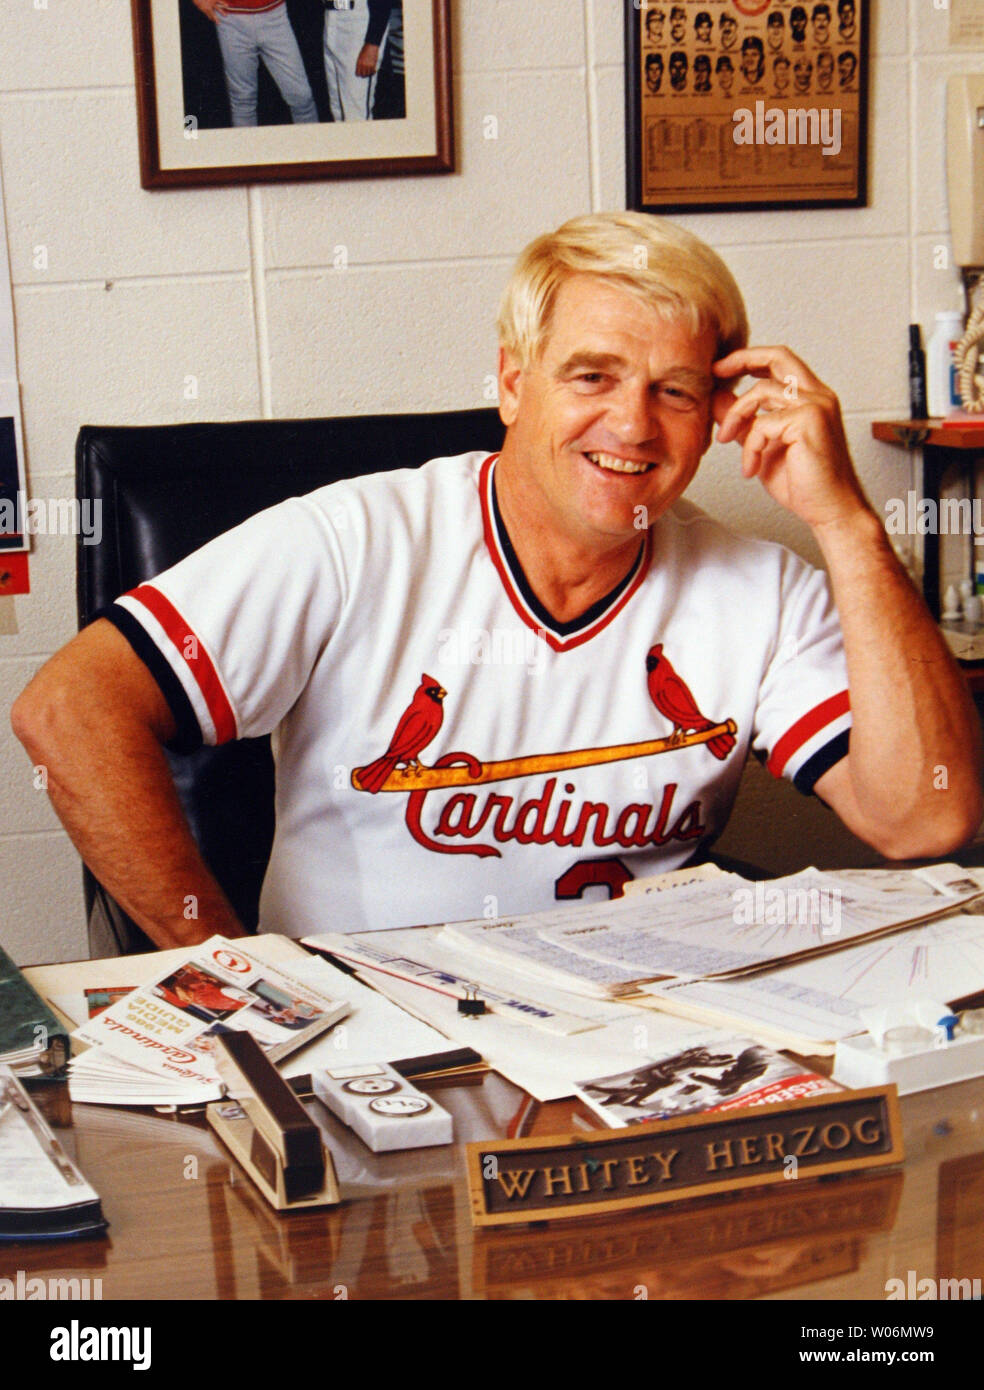 Former St. Louis Cardinals manager Whitey Herzog, shown in this 1980 file  photo, was elected to the National Baseball Hall of Fame by the Hall of  Fame Veterans Committee for Managers and